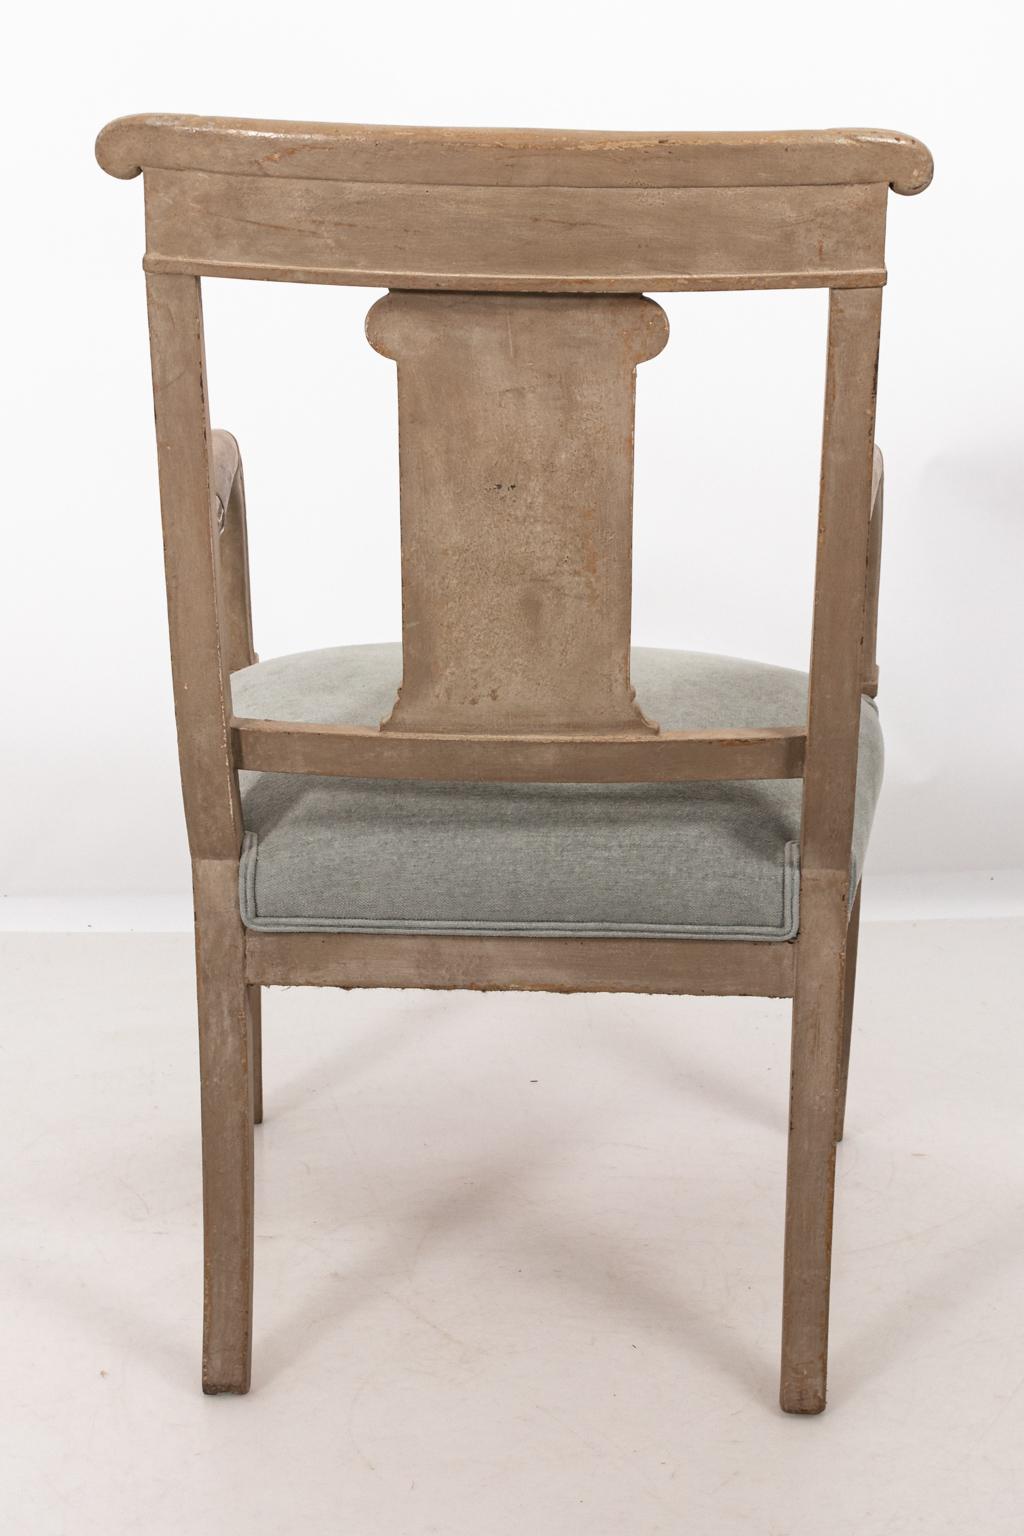 Carved Empire style armchair in bleached Mahogany with an upholstered seat in light blue/gray chenille, circa 1800s. The piece also features white glazed neoclassical motifs including an Ionic column on the pierced, square seat back. Please note of